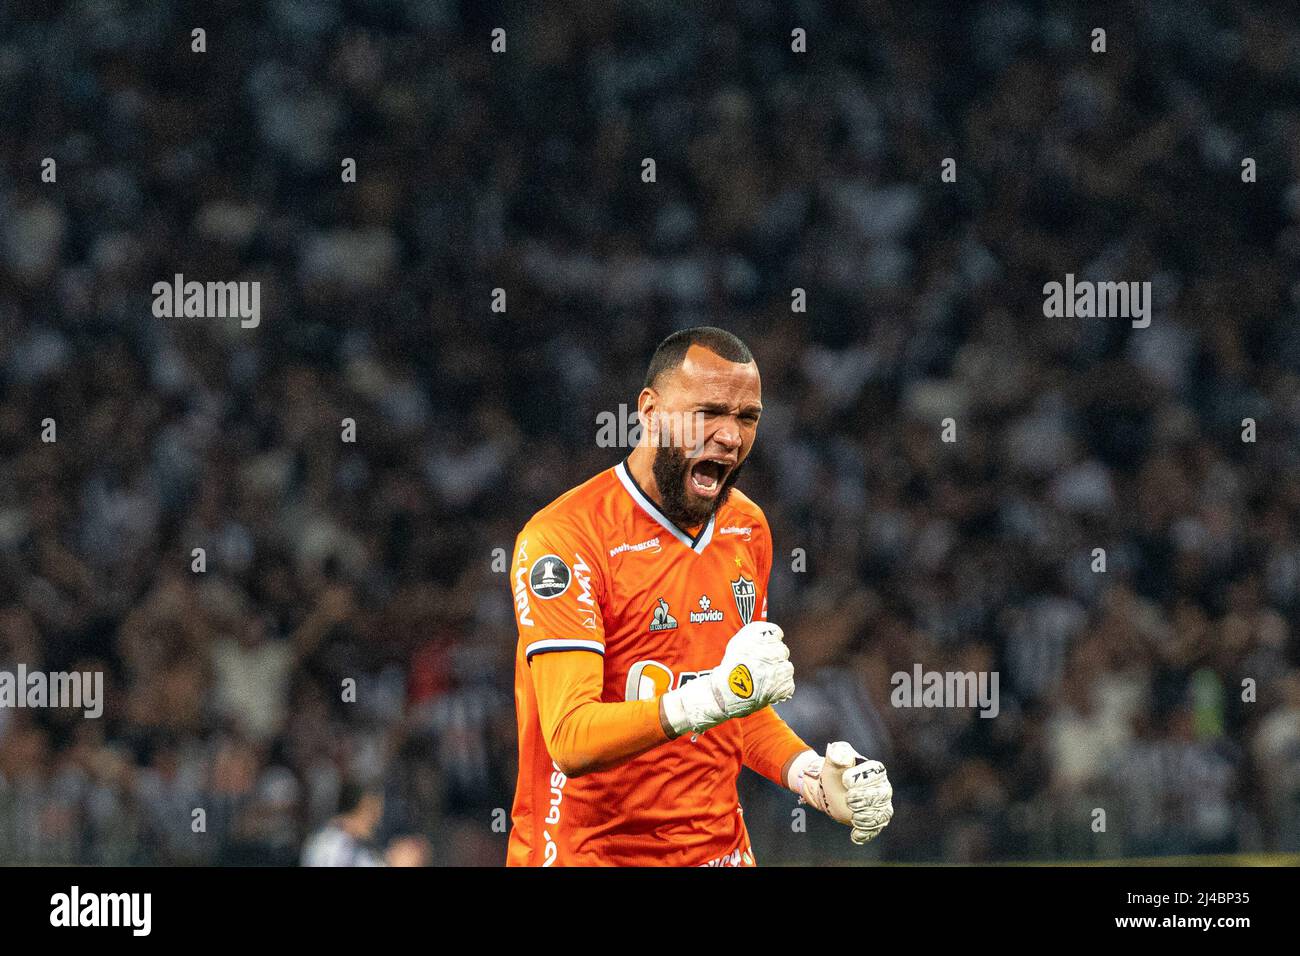 Belo Horizonte, Brazil. 13th Apr, 2022. MG - Belo Horizonte - 04/13/2022 - LIBERTADORES 2022 ATLETICO -MG X AMERICA-MG - Goalkeeper Everson of Atletico-MG celebrates his teammate's goal during a match against America-MG at Mineirao stadium for the Copa Libertadores 2022 championship. Photo: Alessandra Towers/AGIF/Sipa USA Credit: Sipa USA/Alamy Live News Stock Photo